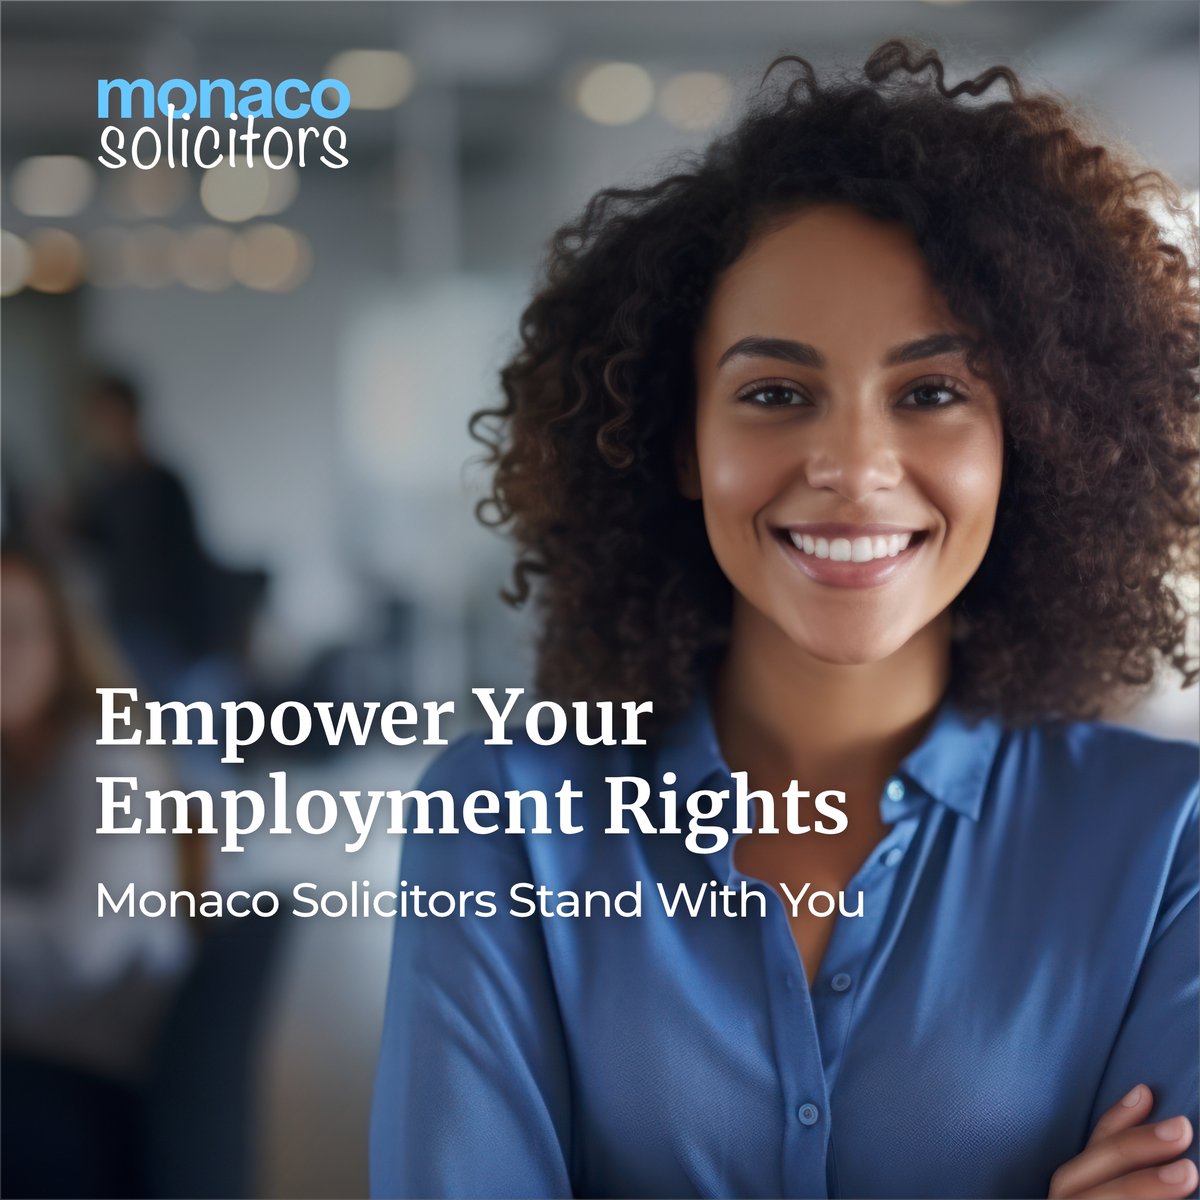 We’re dedicated to championing the cause of workplace injustices.

Don’t settle for less, get in touch to transform your workplace challenges into victories.

monacosolicitors.co.uk

#JusticeAtWork #EmployeeRights #MonacoSolicitors